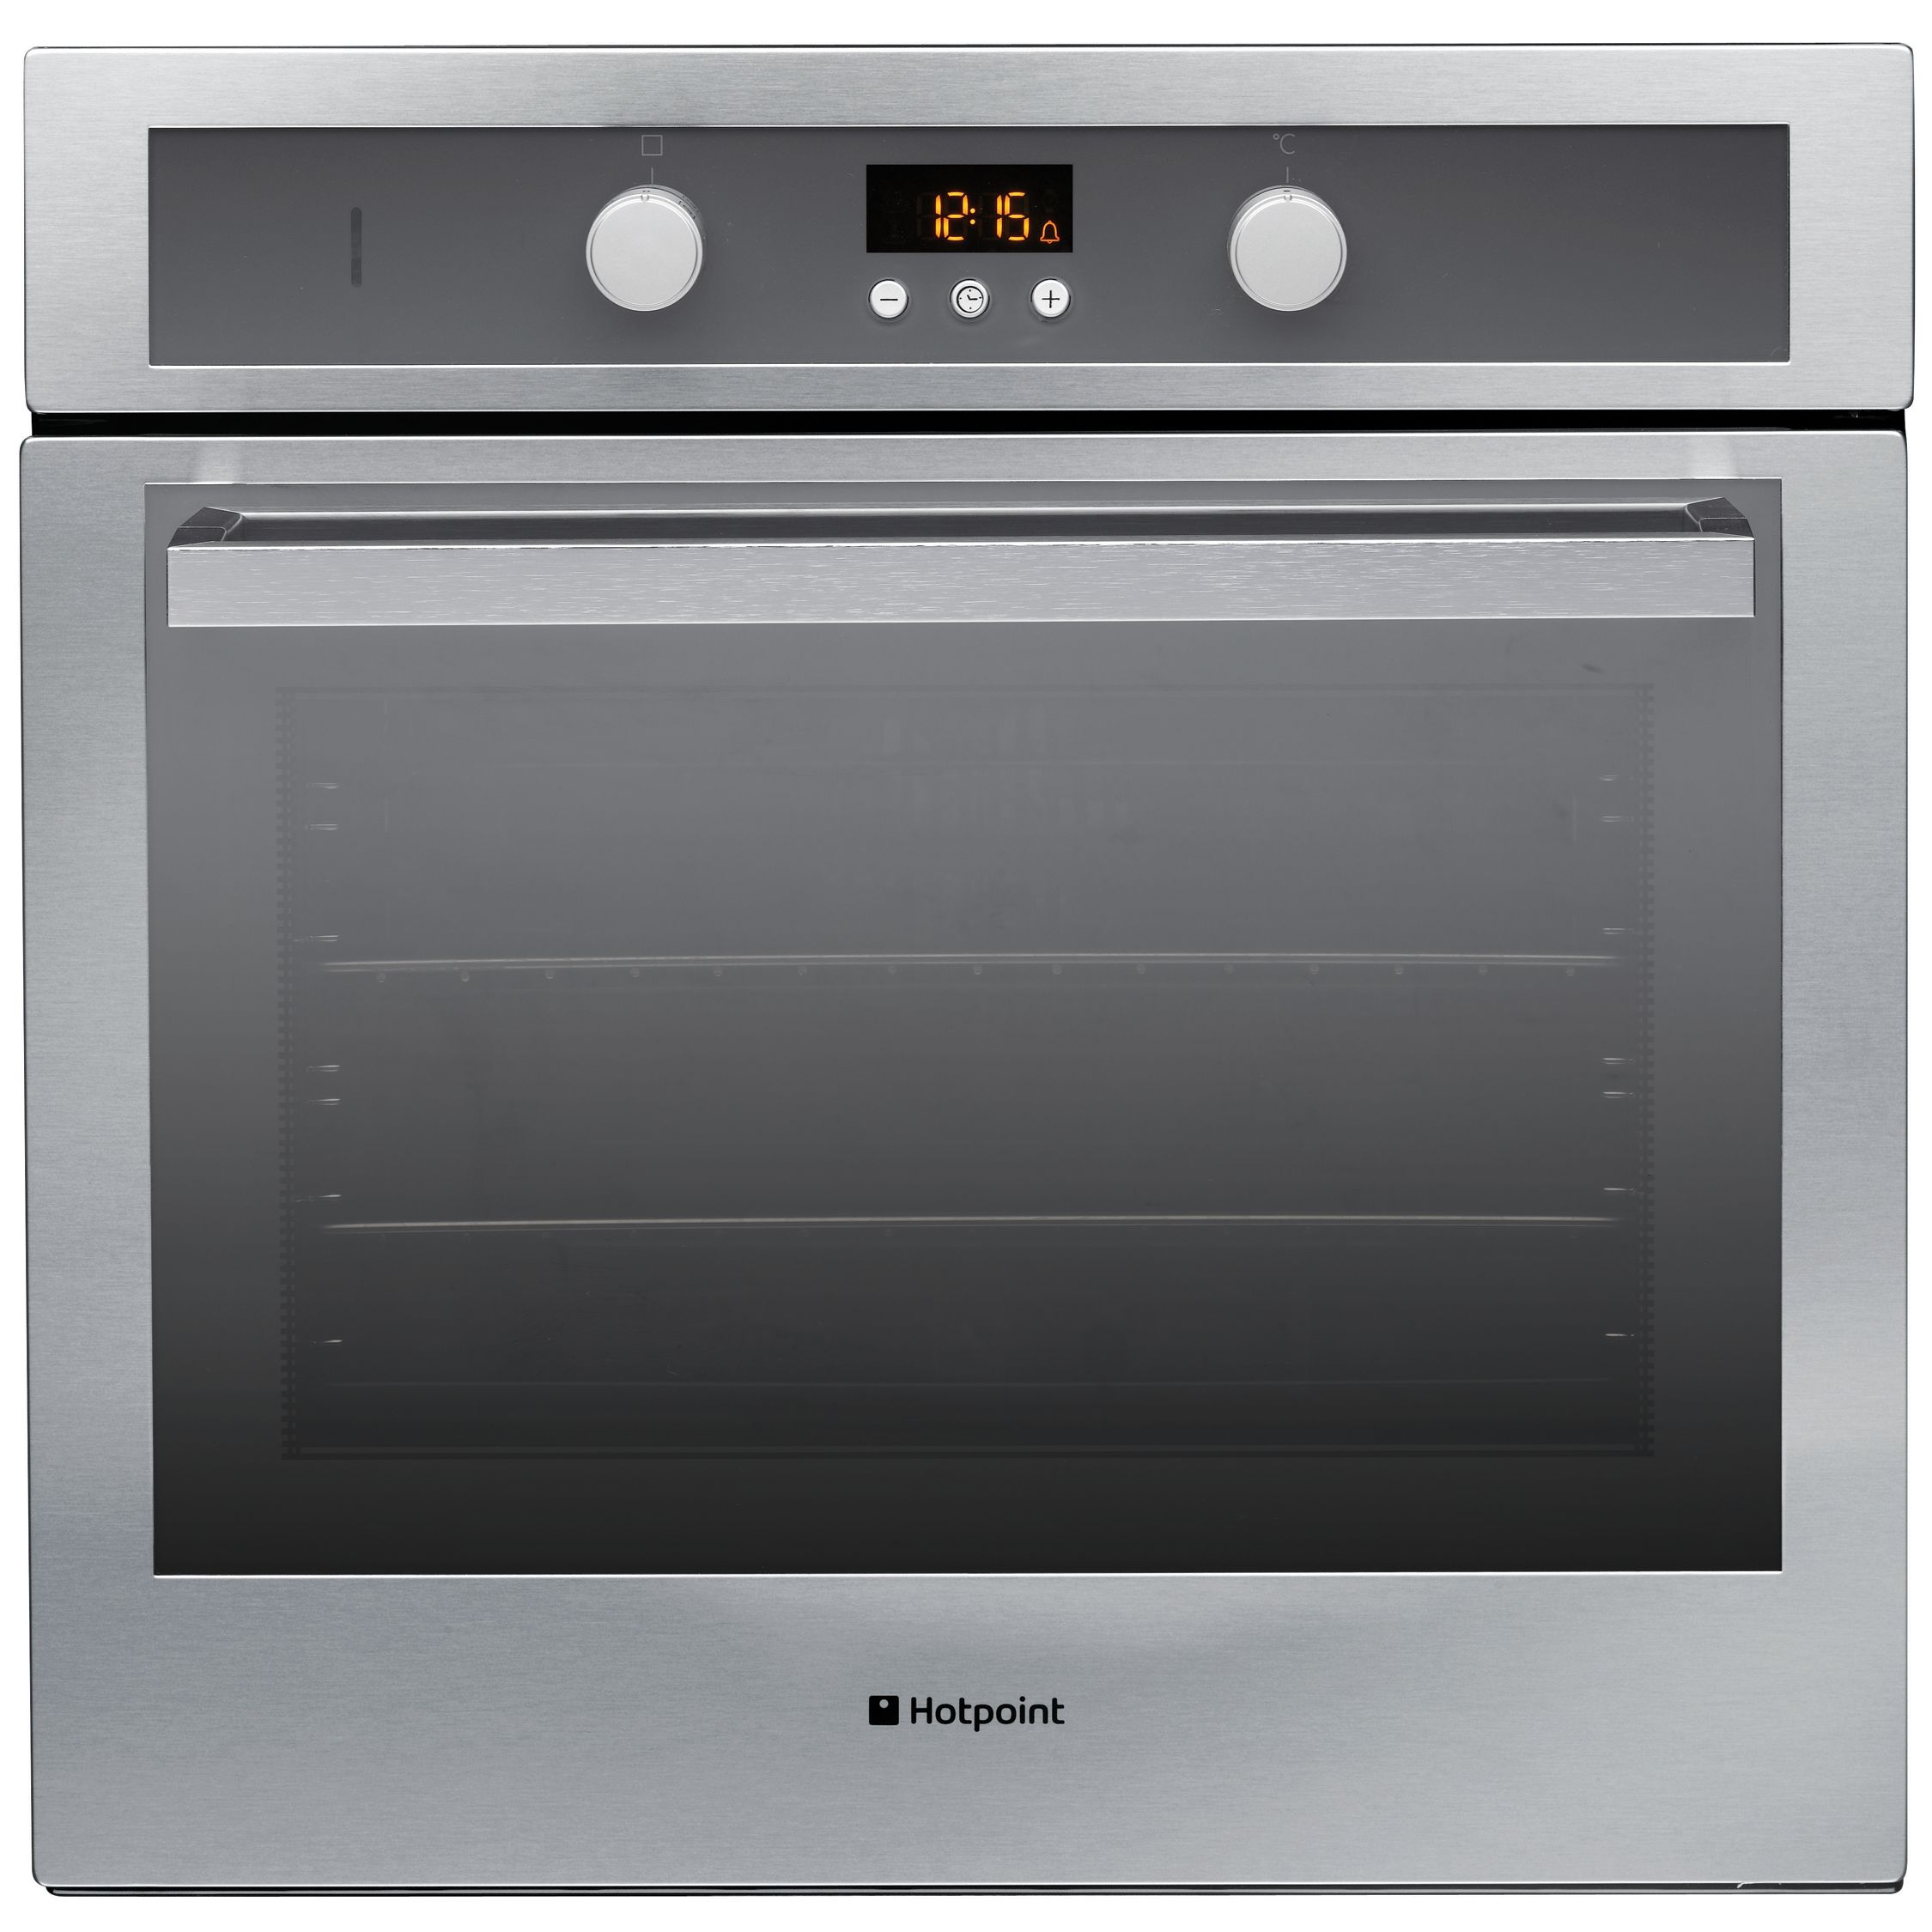 Hotpoint SE661X Single Electric Oven, Stainless Steel at John Lewis